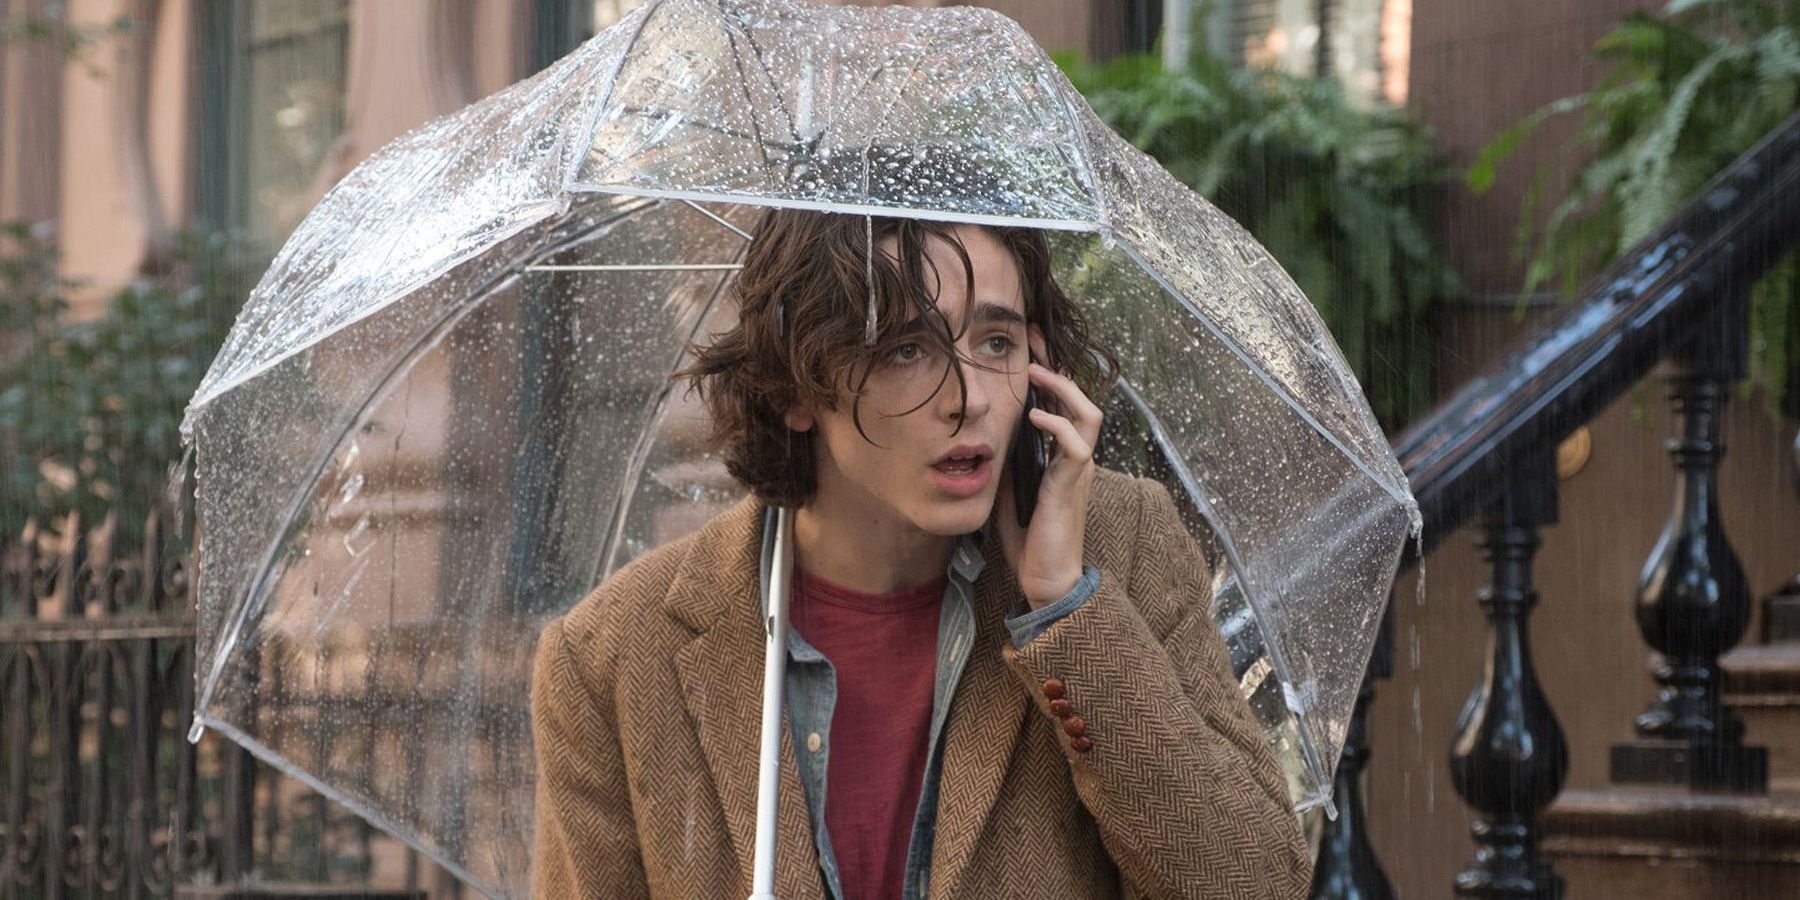 Gatsby on his phone under an umbrella in A Rainy Day In New York